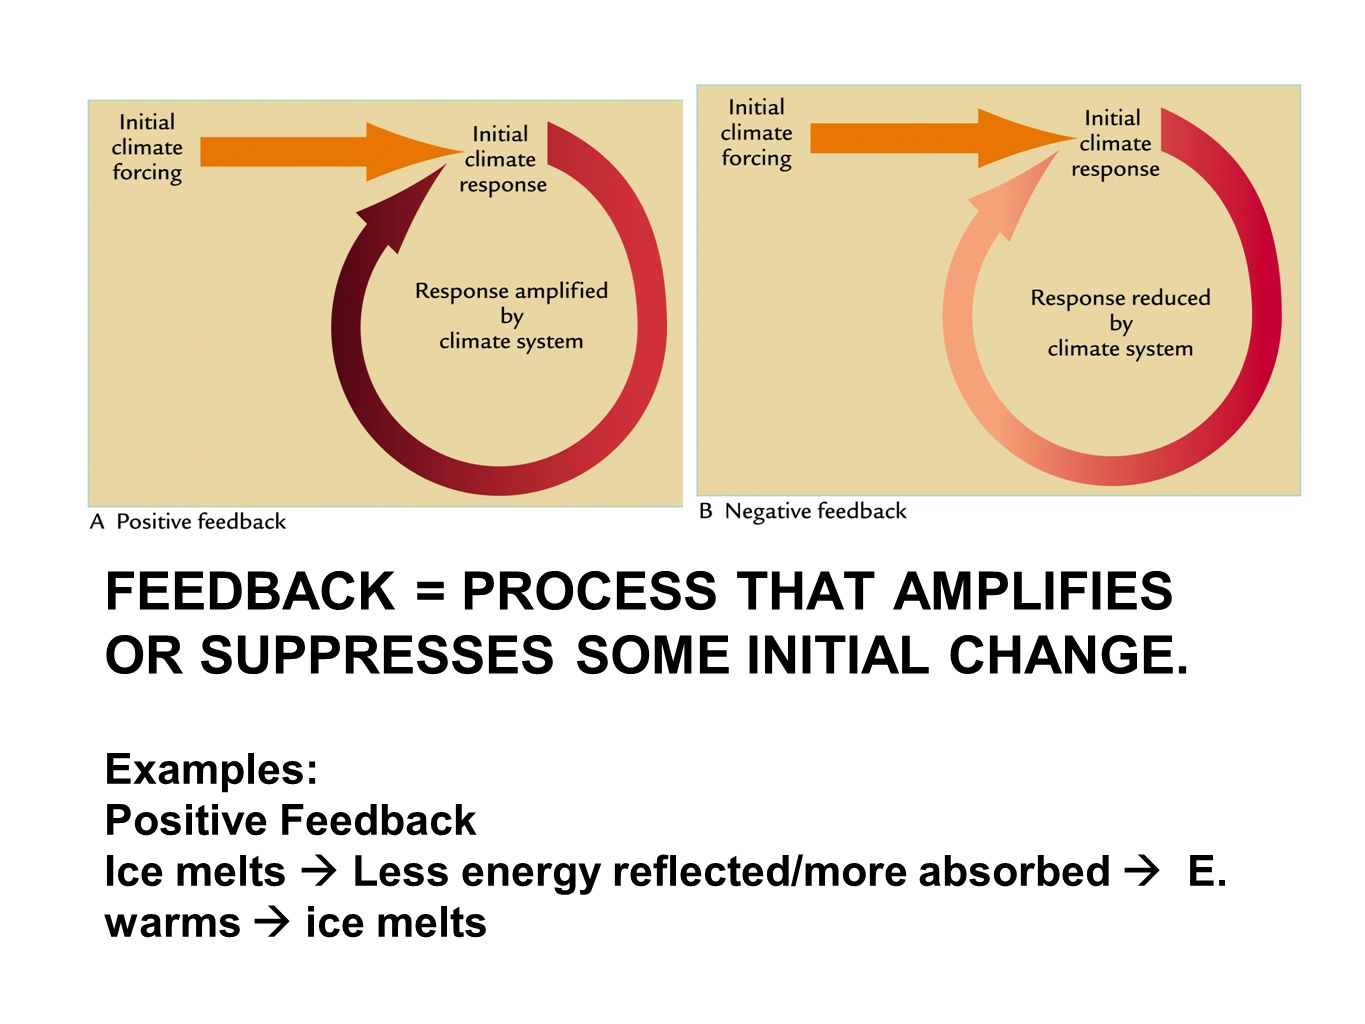 FEEDBACK = PROCESS THAT AMPLIFIES OR SUPPRESSES SOME INITIAL CHANGE.